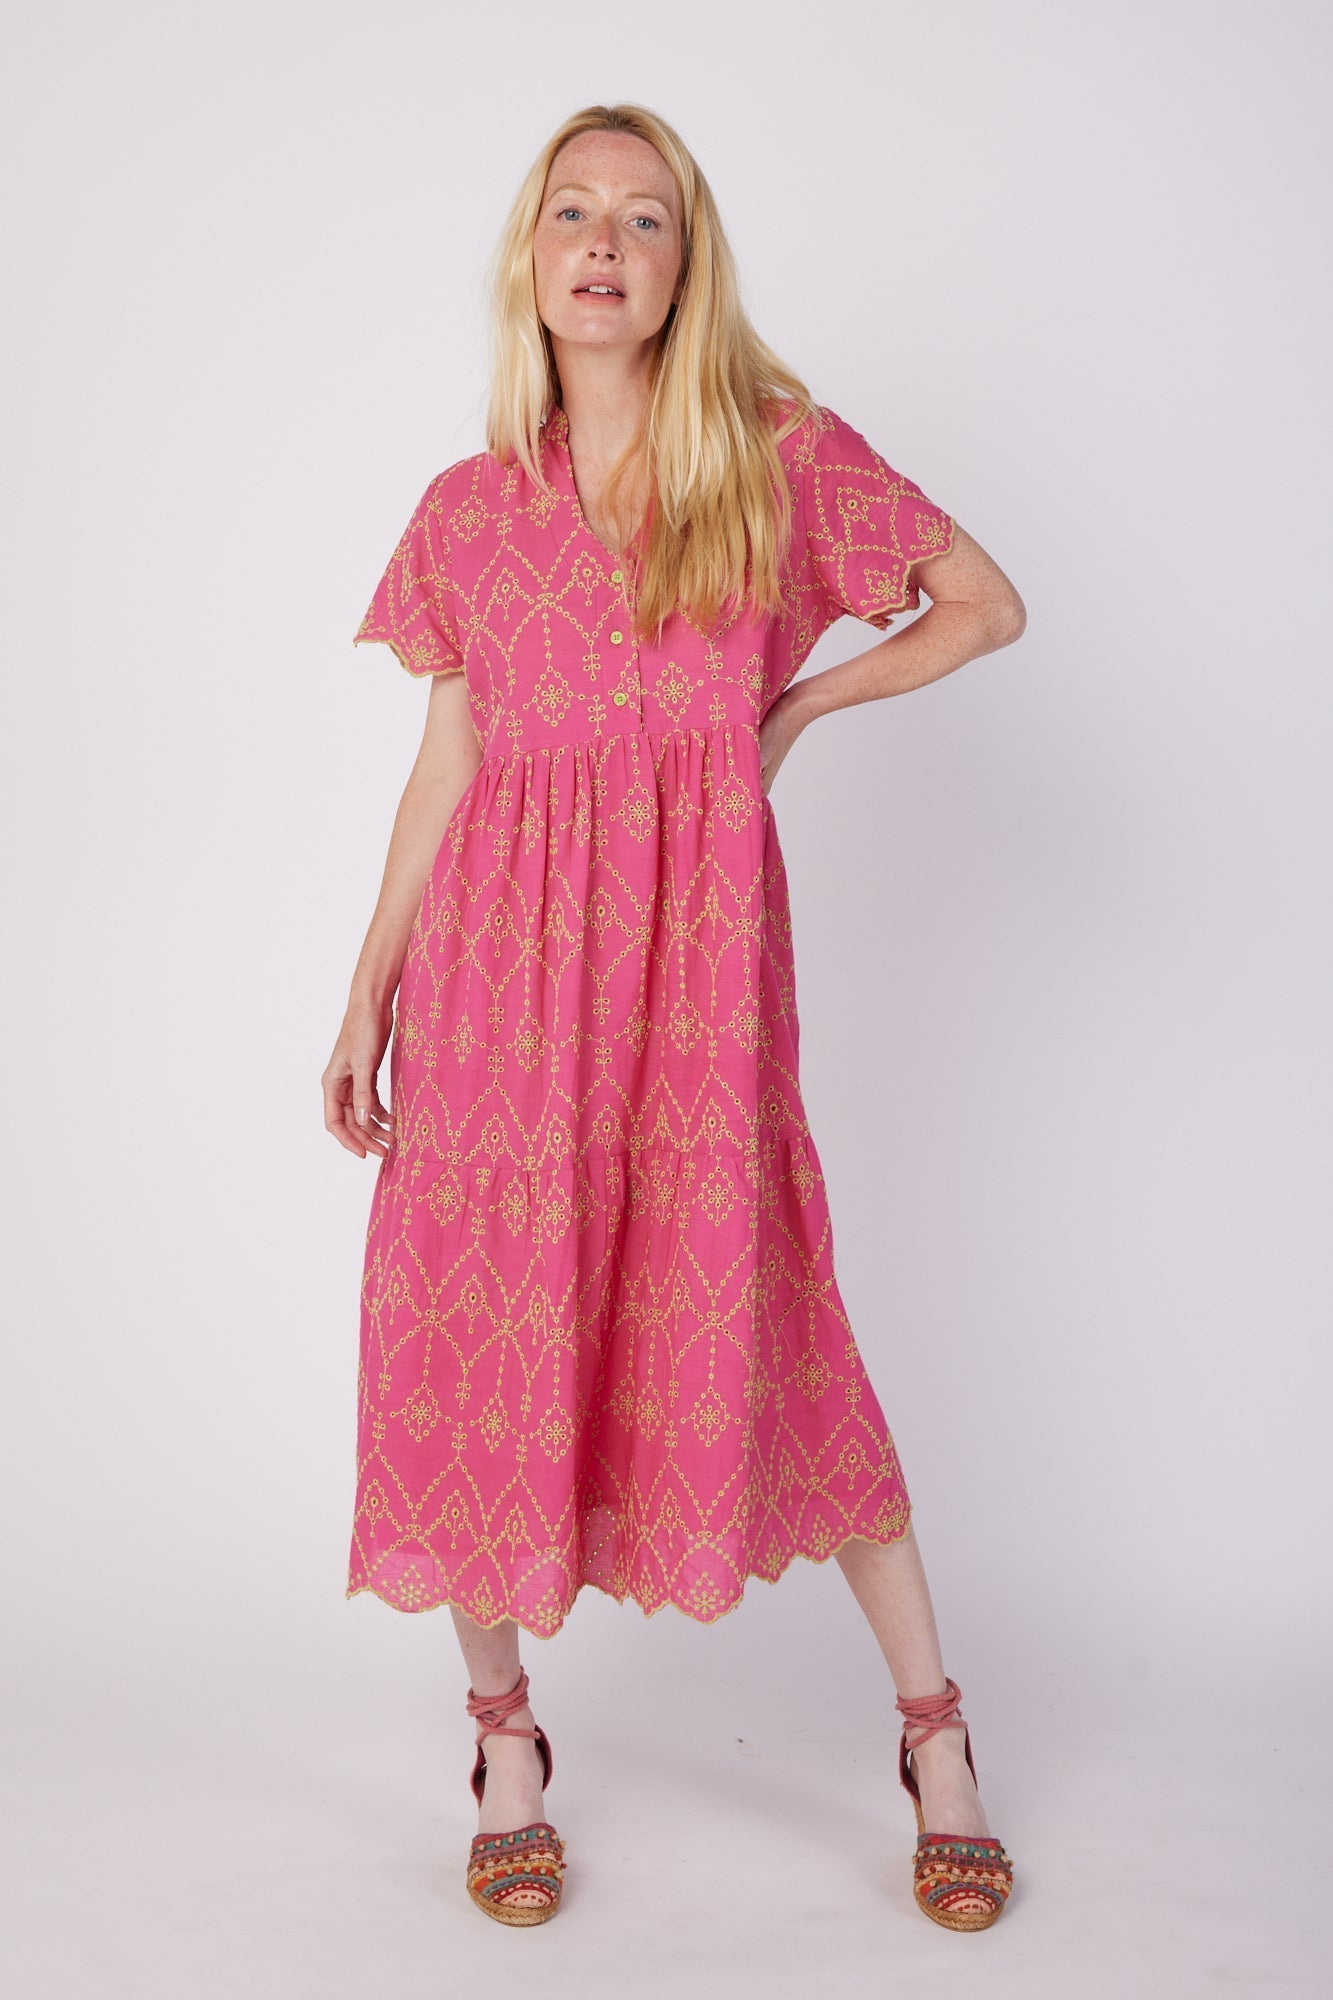 ModaPosa Cadenza Short Sleeve Knee Length Eyelet Dress with Band Collar in Sorbet . Discover women's resort dresses and lifestyle clothing inspired by the Mediterranean. Free worldwide shipping available!